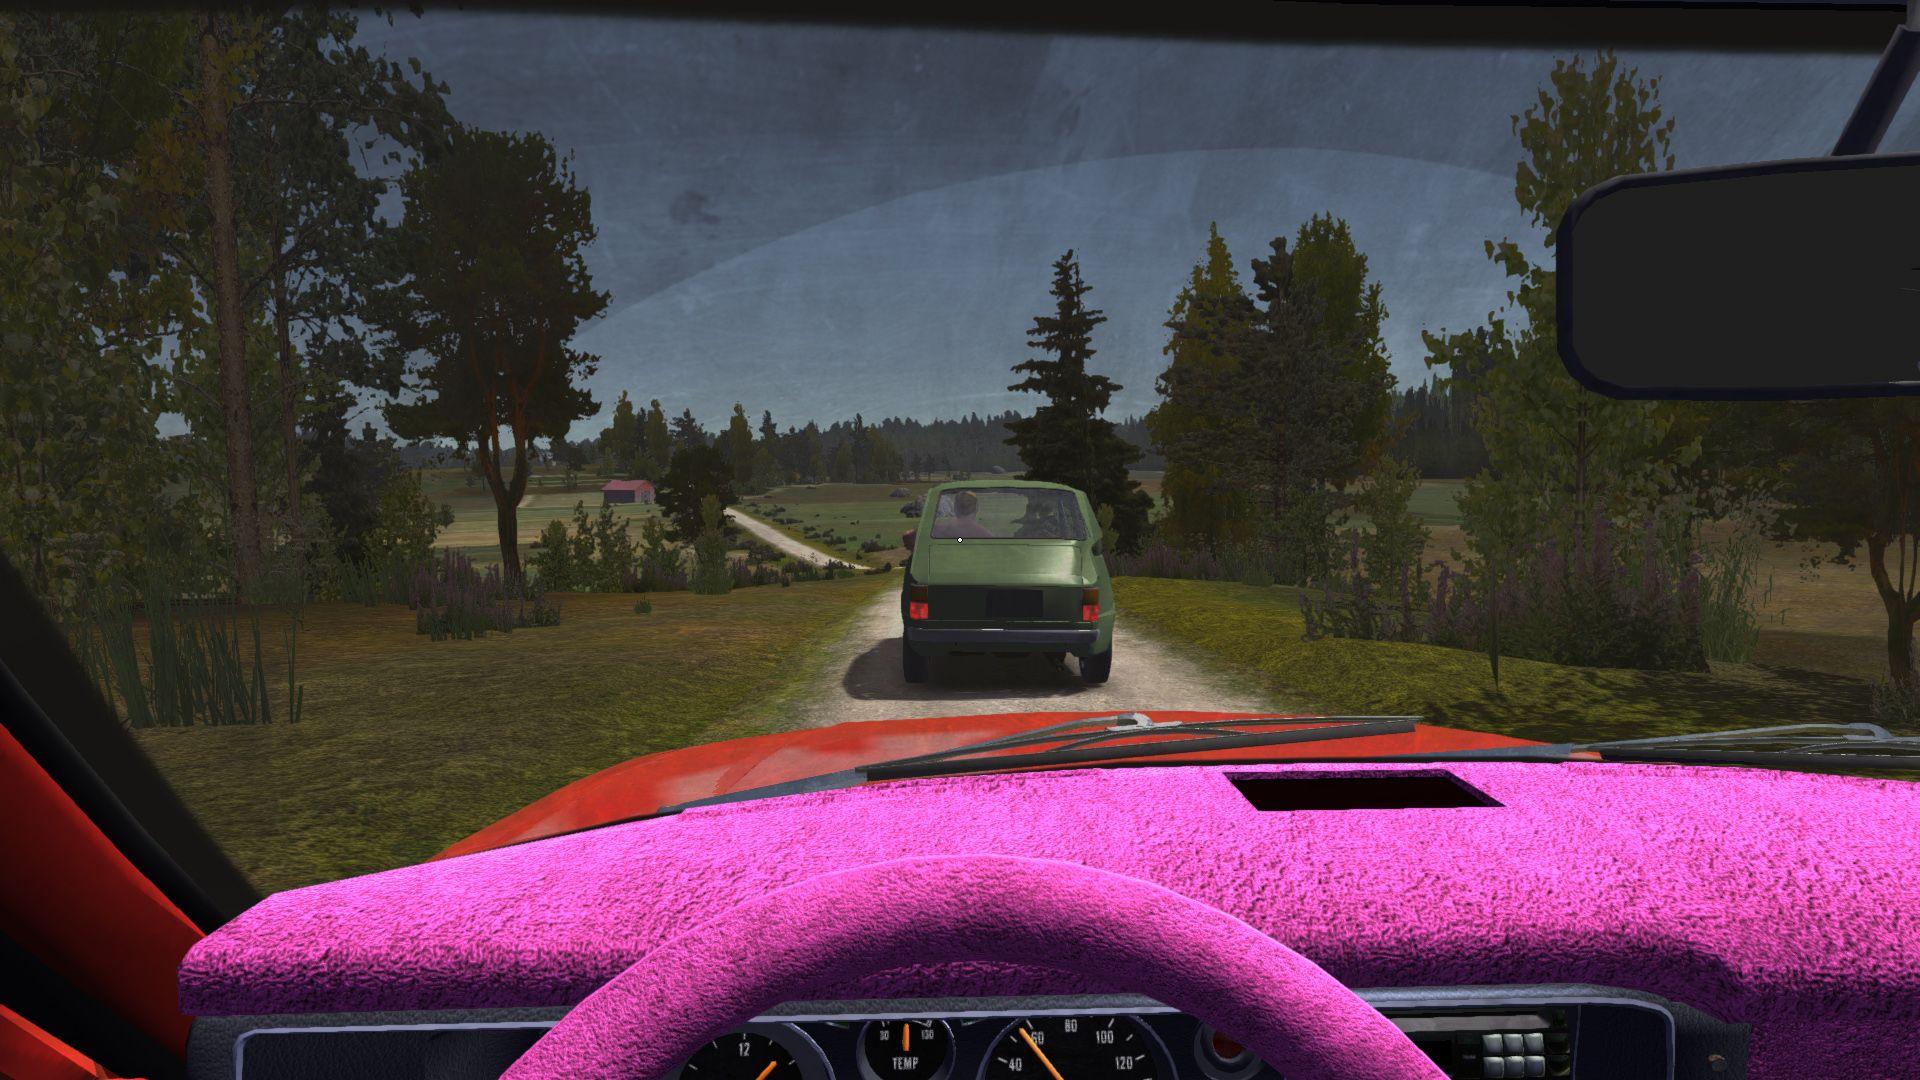 My Summer Car screenshots, image and picture